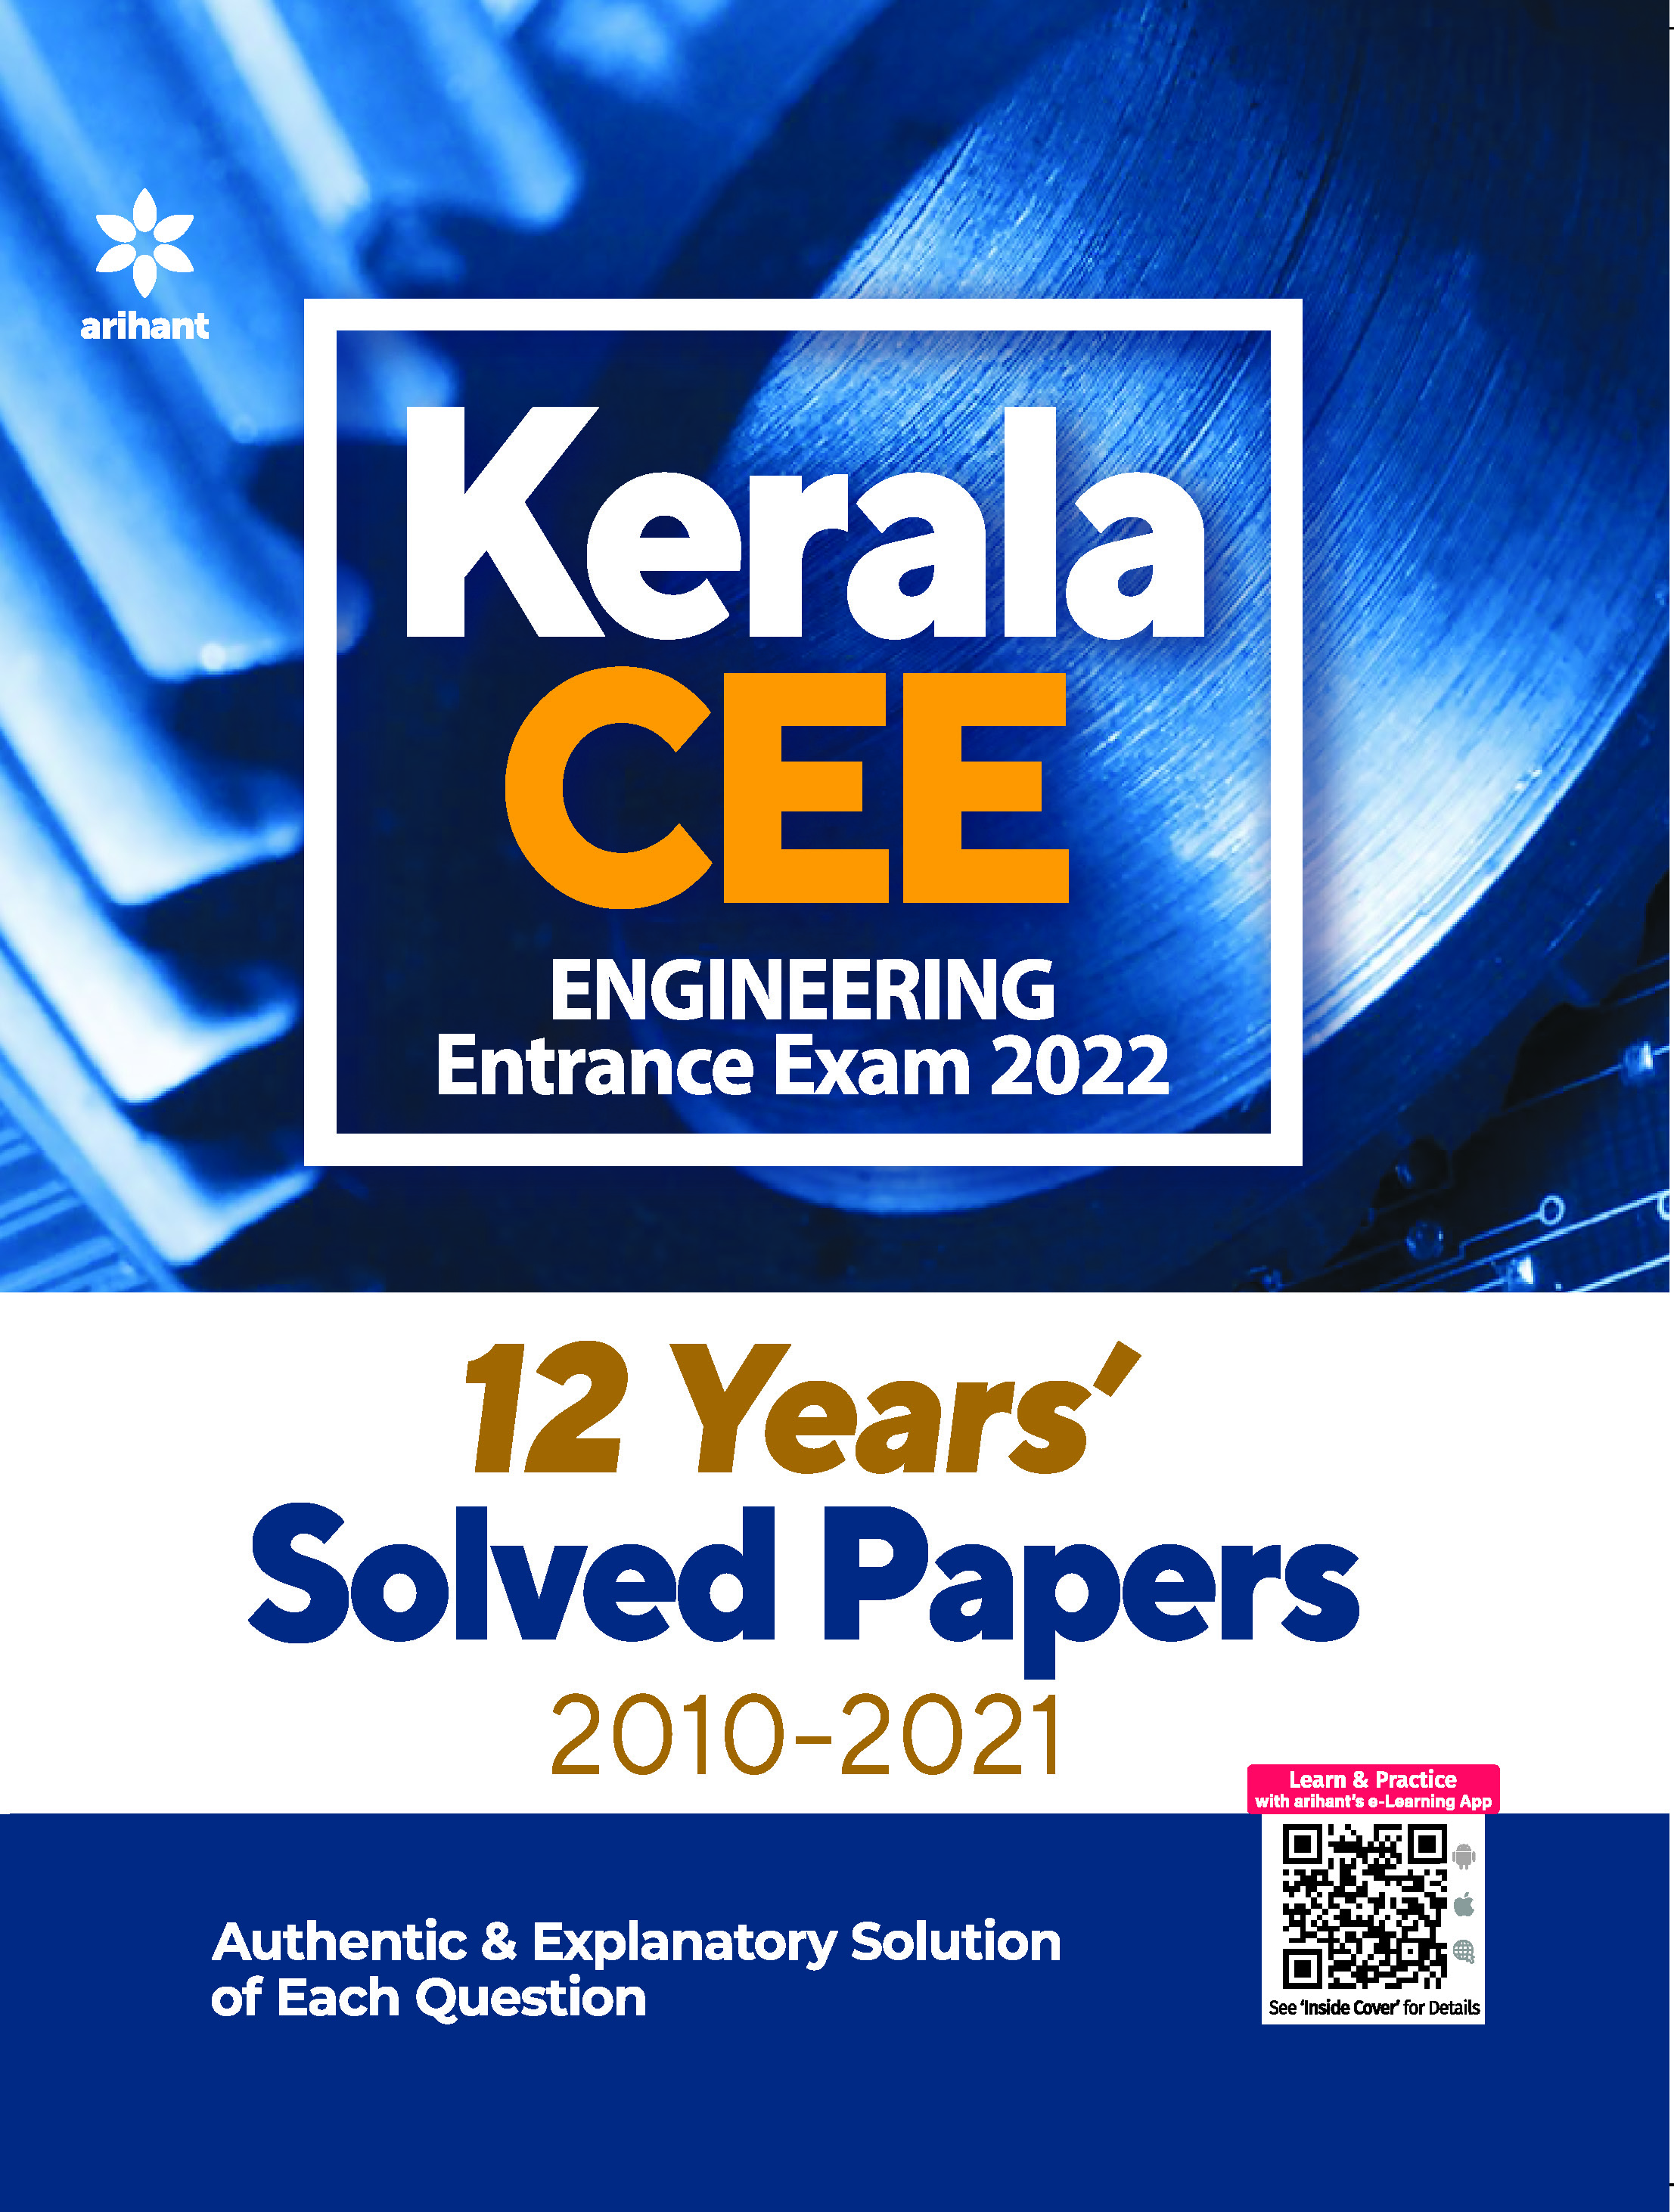 12 Years Solved Papers Kerala CEE Engineering Entrance Exam 2022